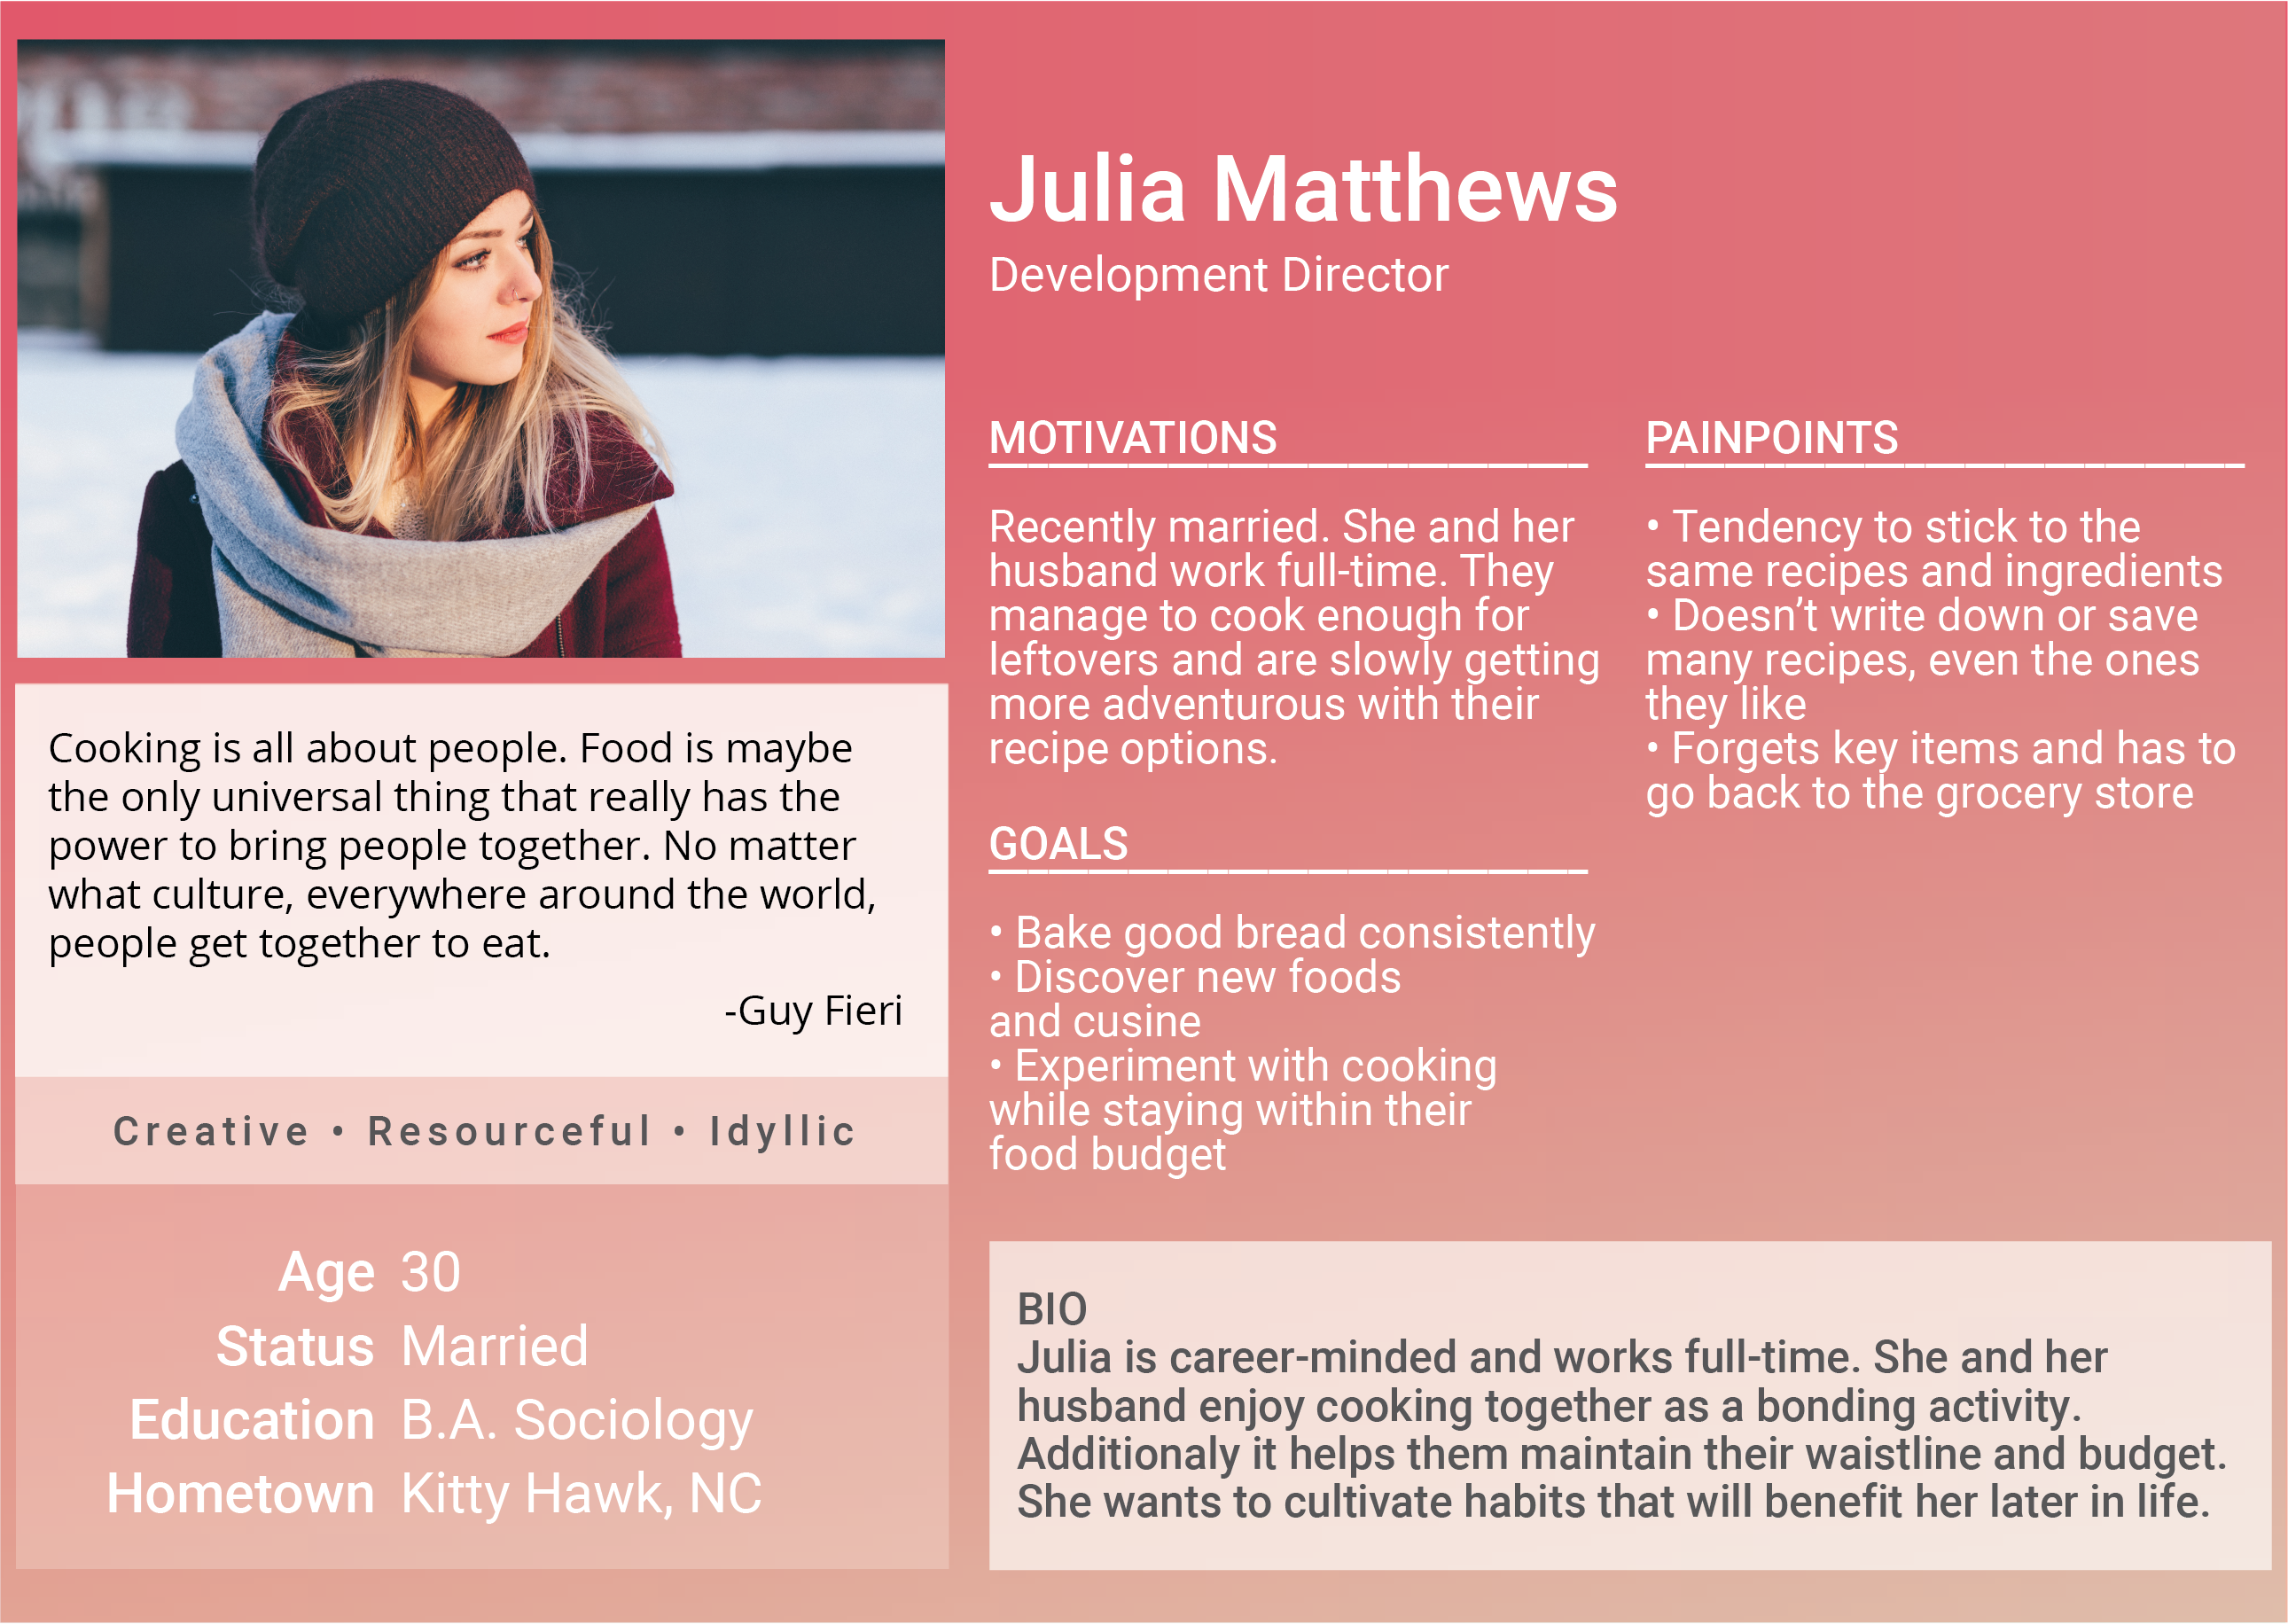 User Persona showcasing Julia Matthews. Julia is a Development Director who's career minded and works full-time. She and her husband cook together as a bonding activity and they are slowly getting more adventurous with their recipe options. She wants to eventually bake bread consistently and experiment with cooking while staying within their food budget. Some painpoints she has is that she tends to stick to the same recipes and ingredients, she has a bad habit of saving recipes she enjoys, and sometimes forgets key items at the grocery store.